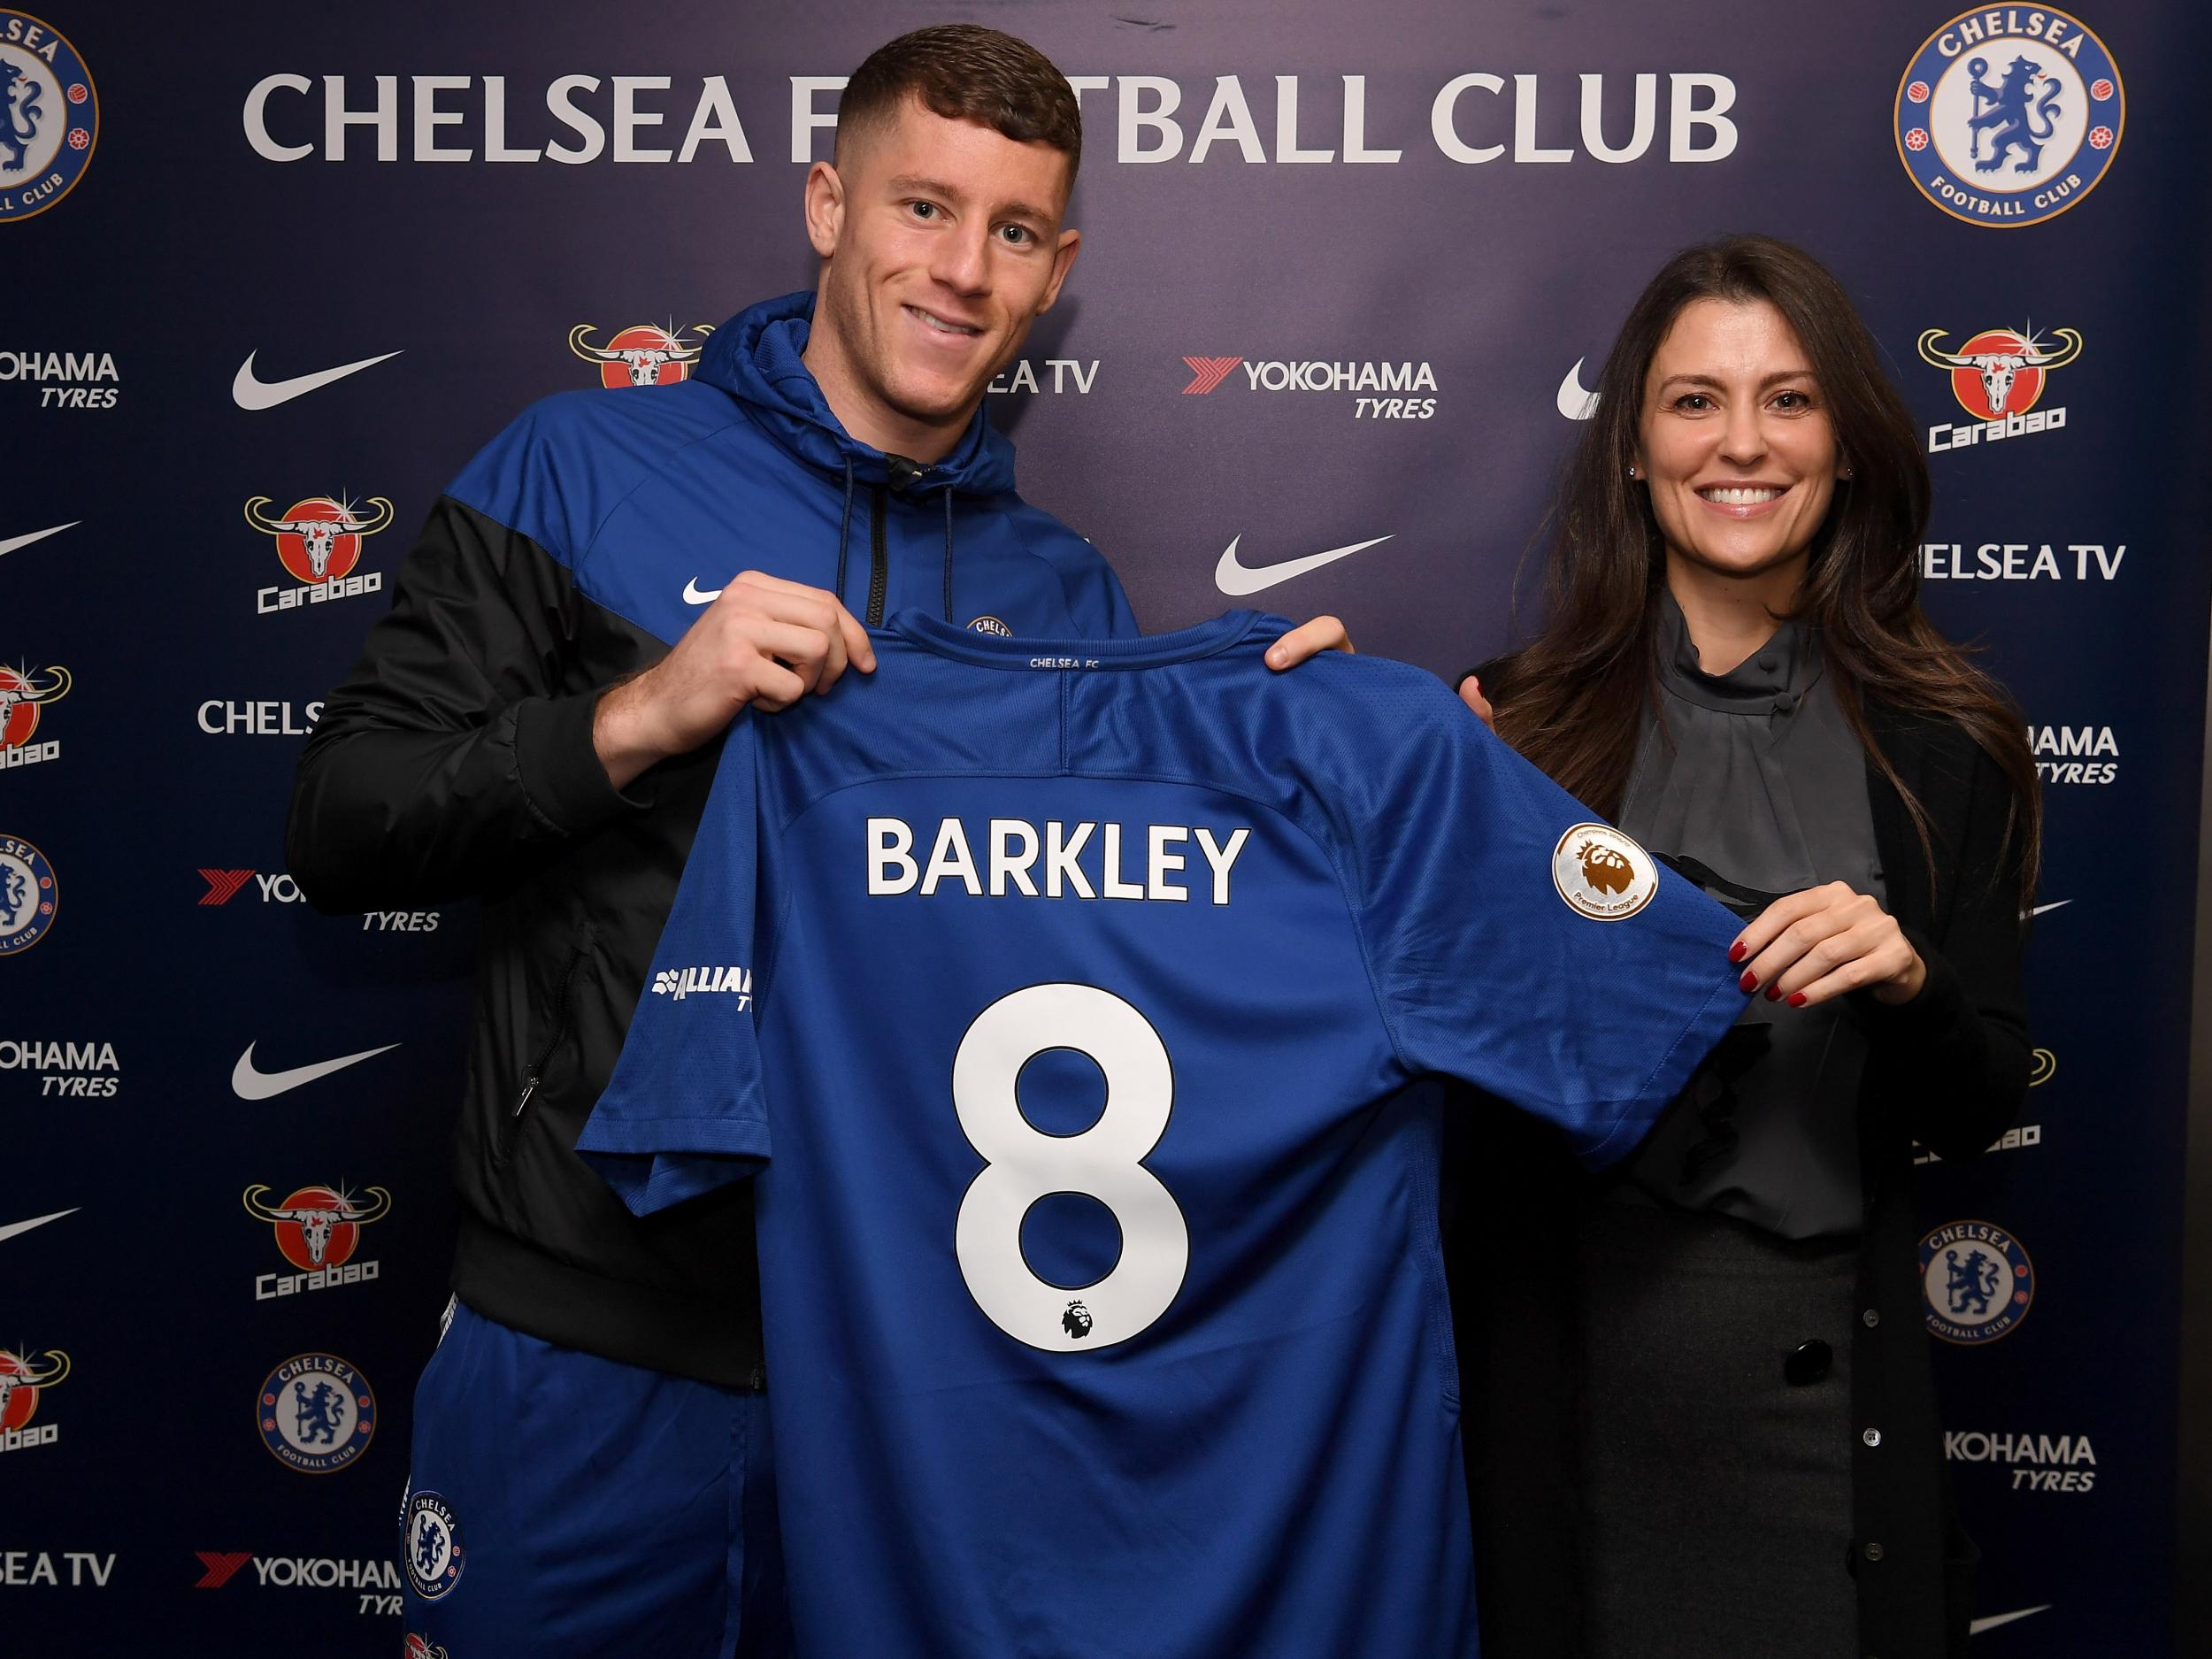 Barkley signed on a five-and-a-half year deal